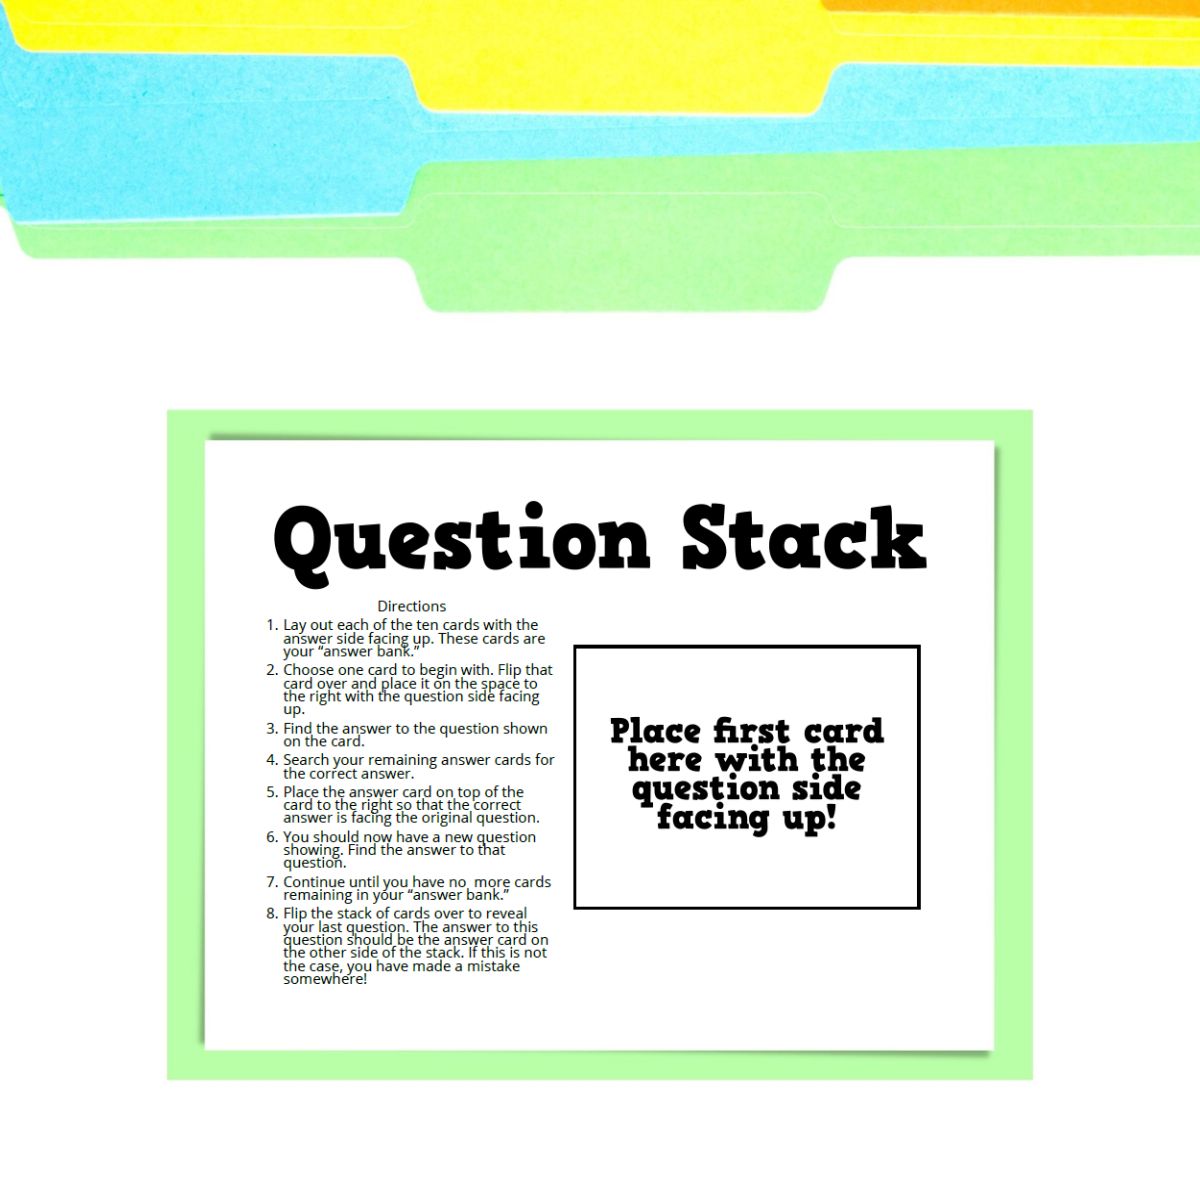 question stack intruction page